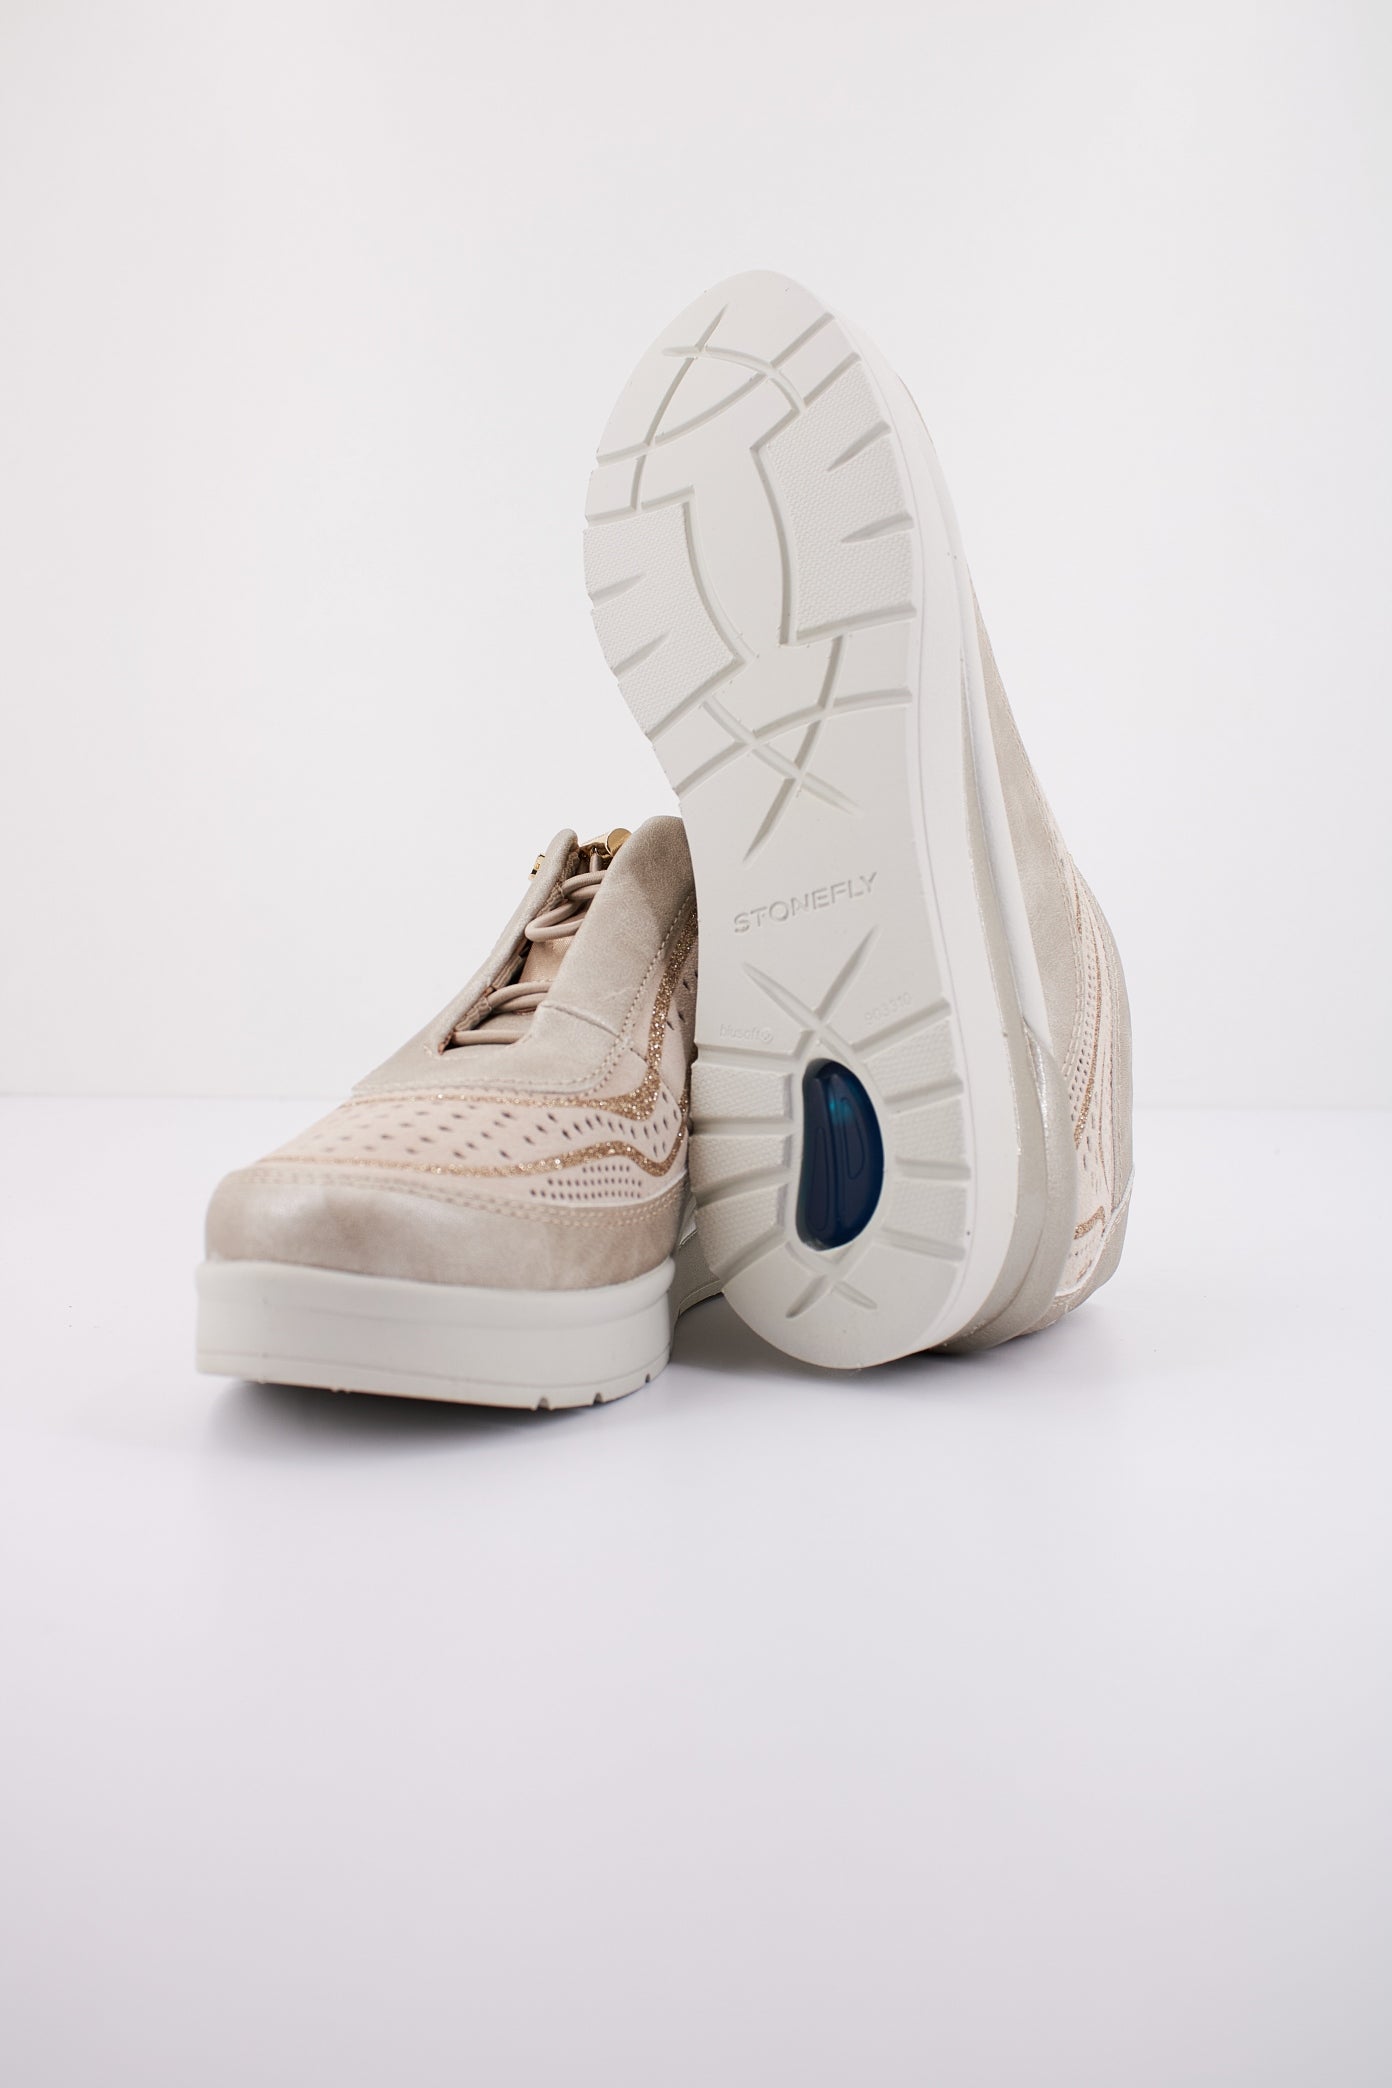 STONEFLY CREAM  S. LAMINATED/VELOU en color BEIS  (5)